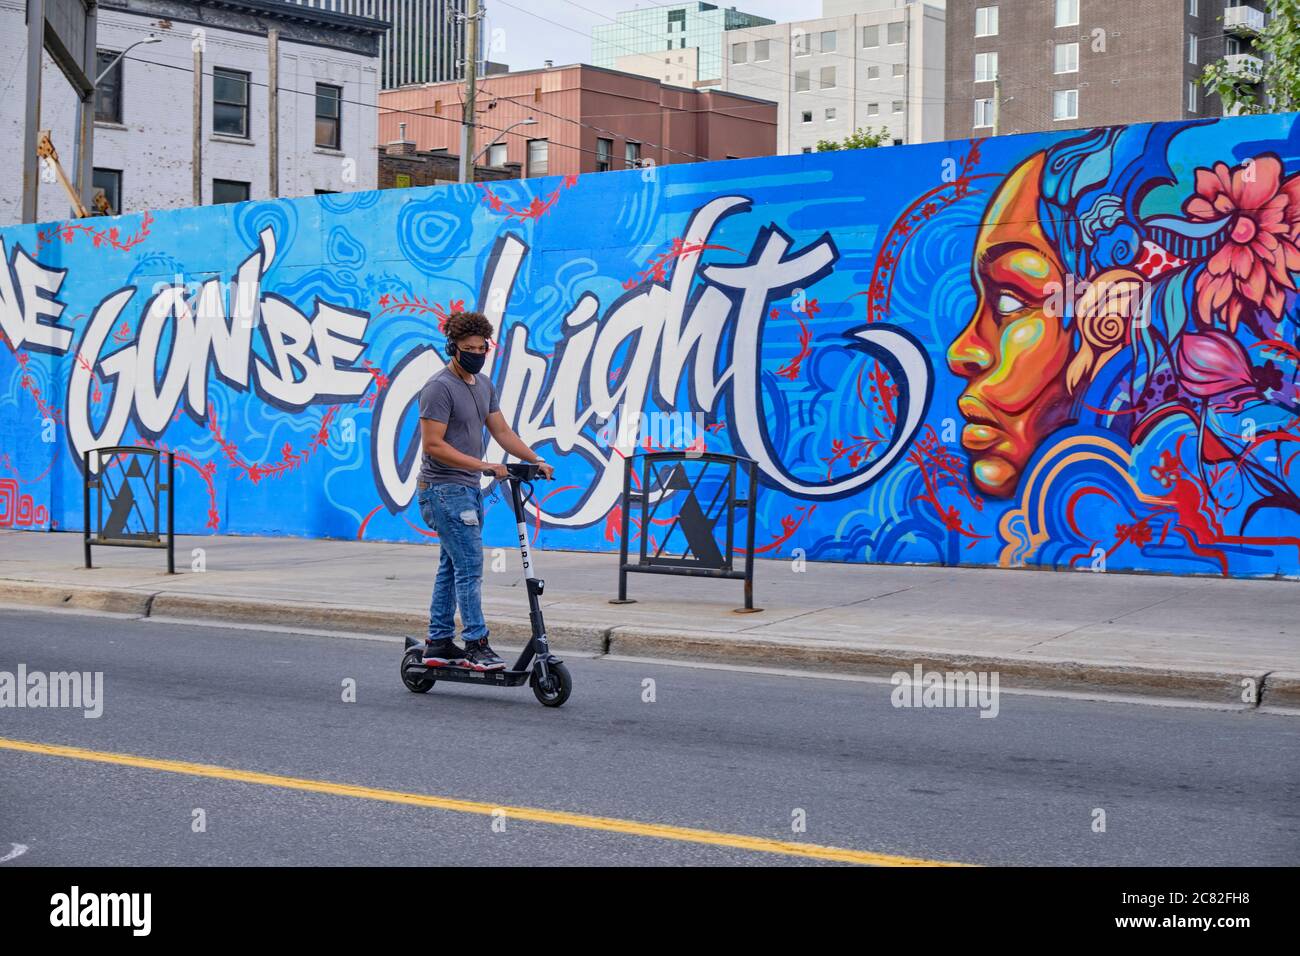 Man on electric scooted by Ottawa Wall art 'We Gon' be Alright' inspired by worldwide protests against systemic anti-Black racism; justice and police Stock Photo